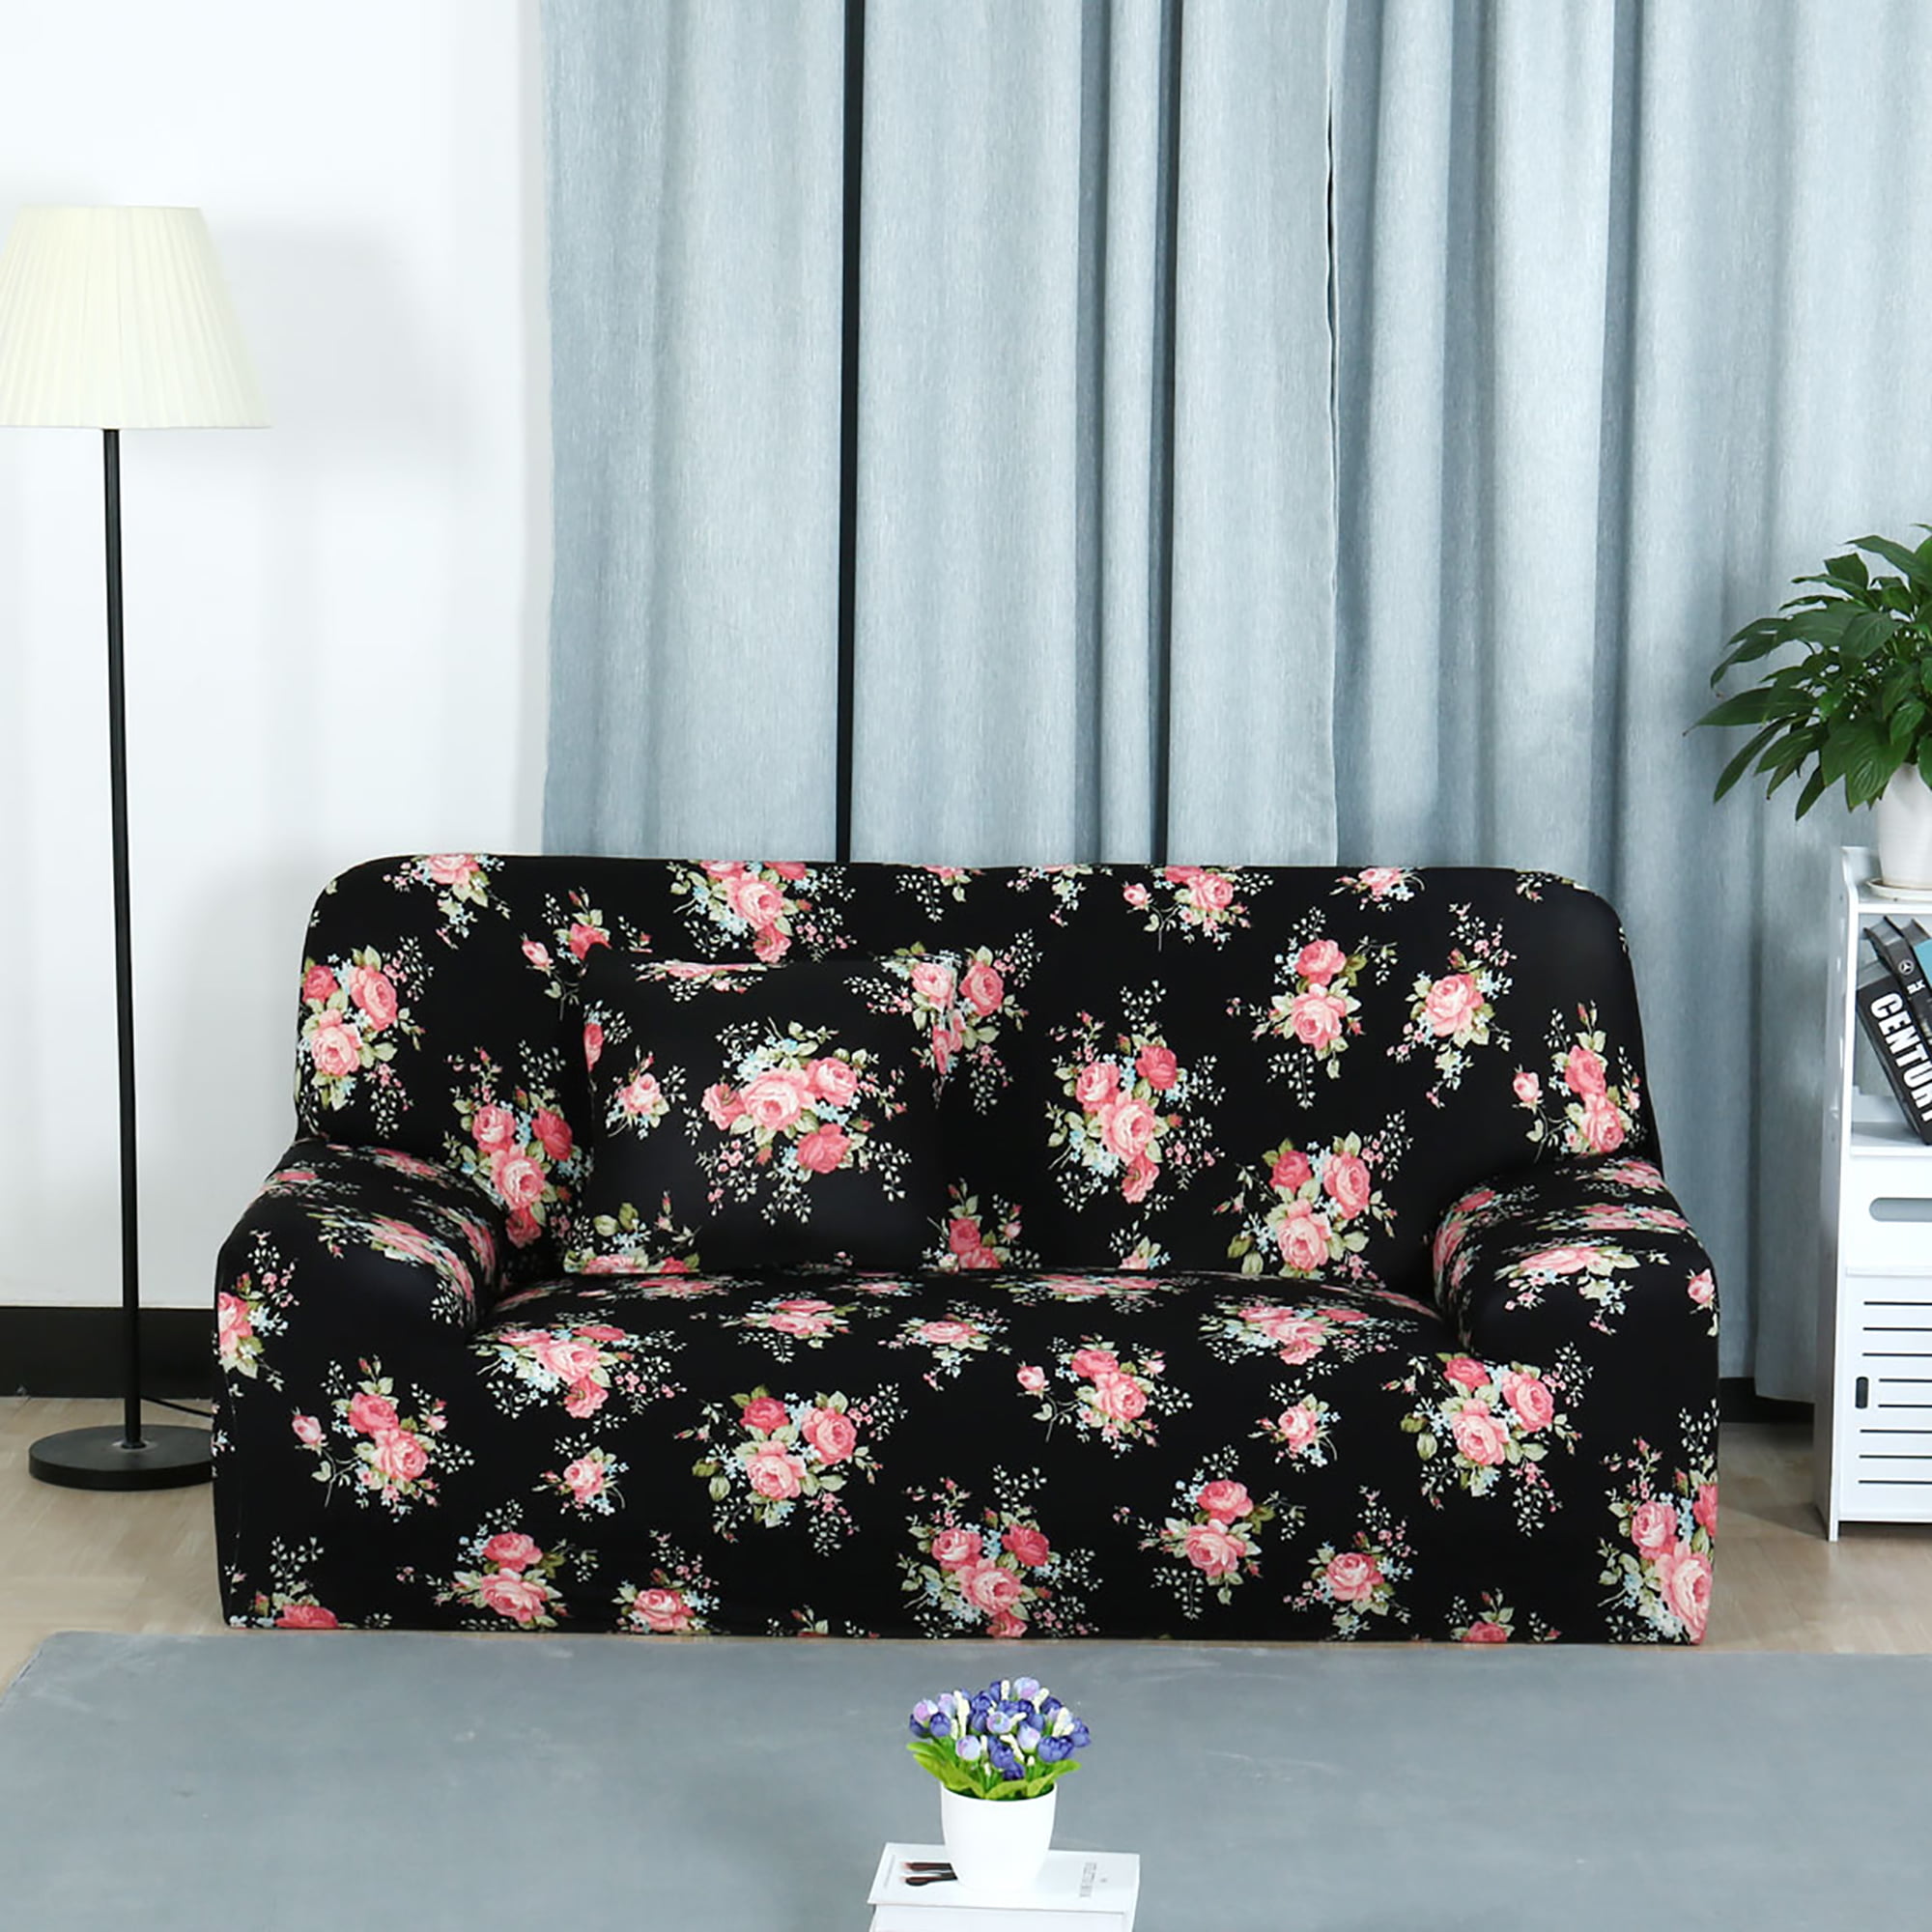 Details about   Sofa Furniture Cover Slipcover Big Elastic Printed Sofa Cover @ 